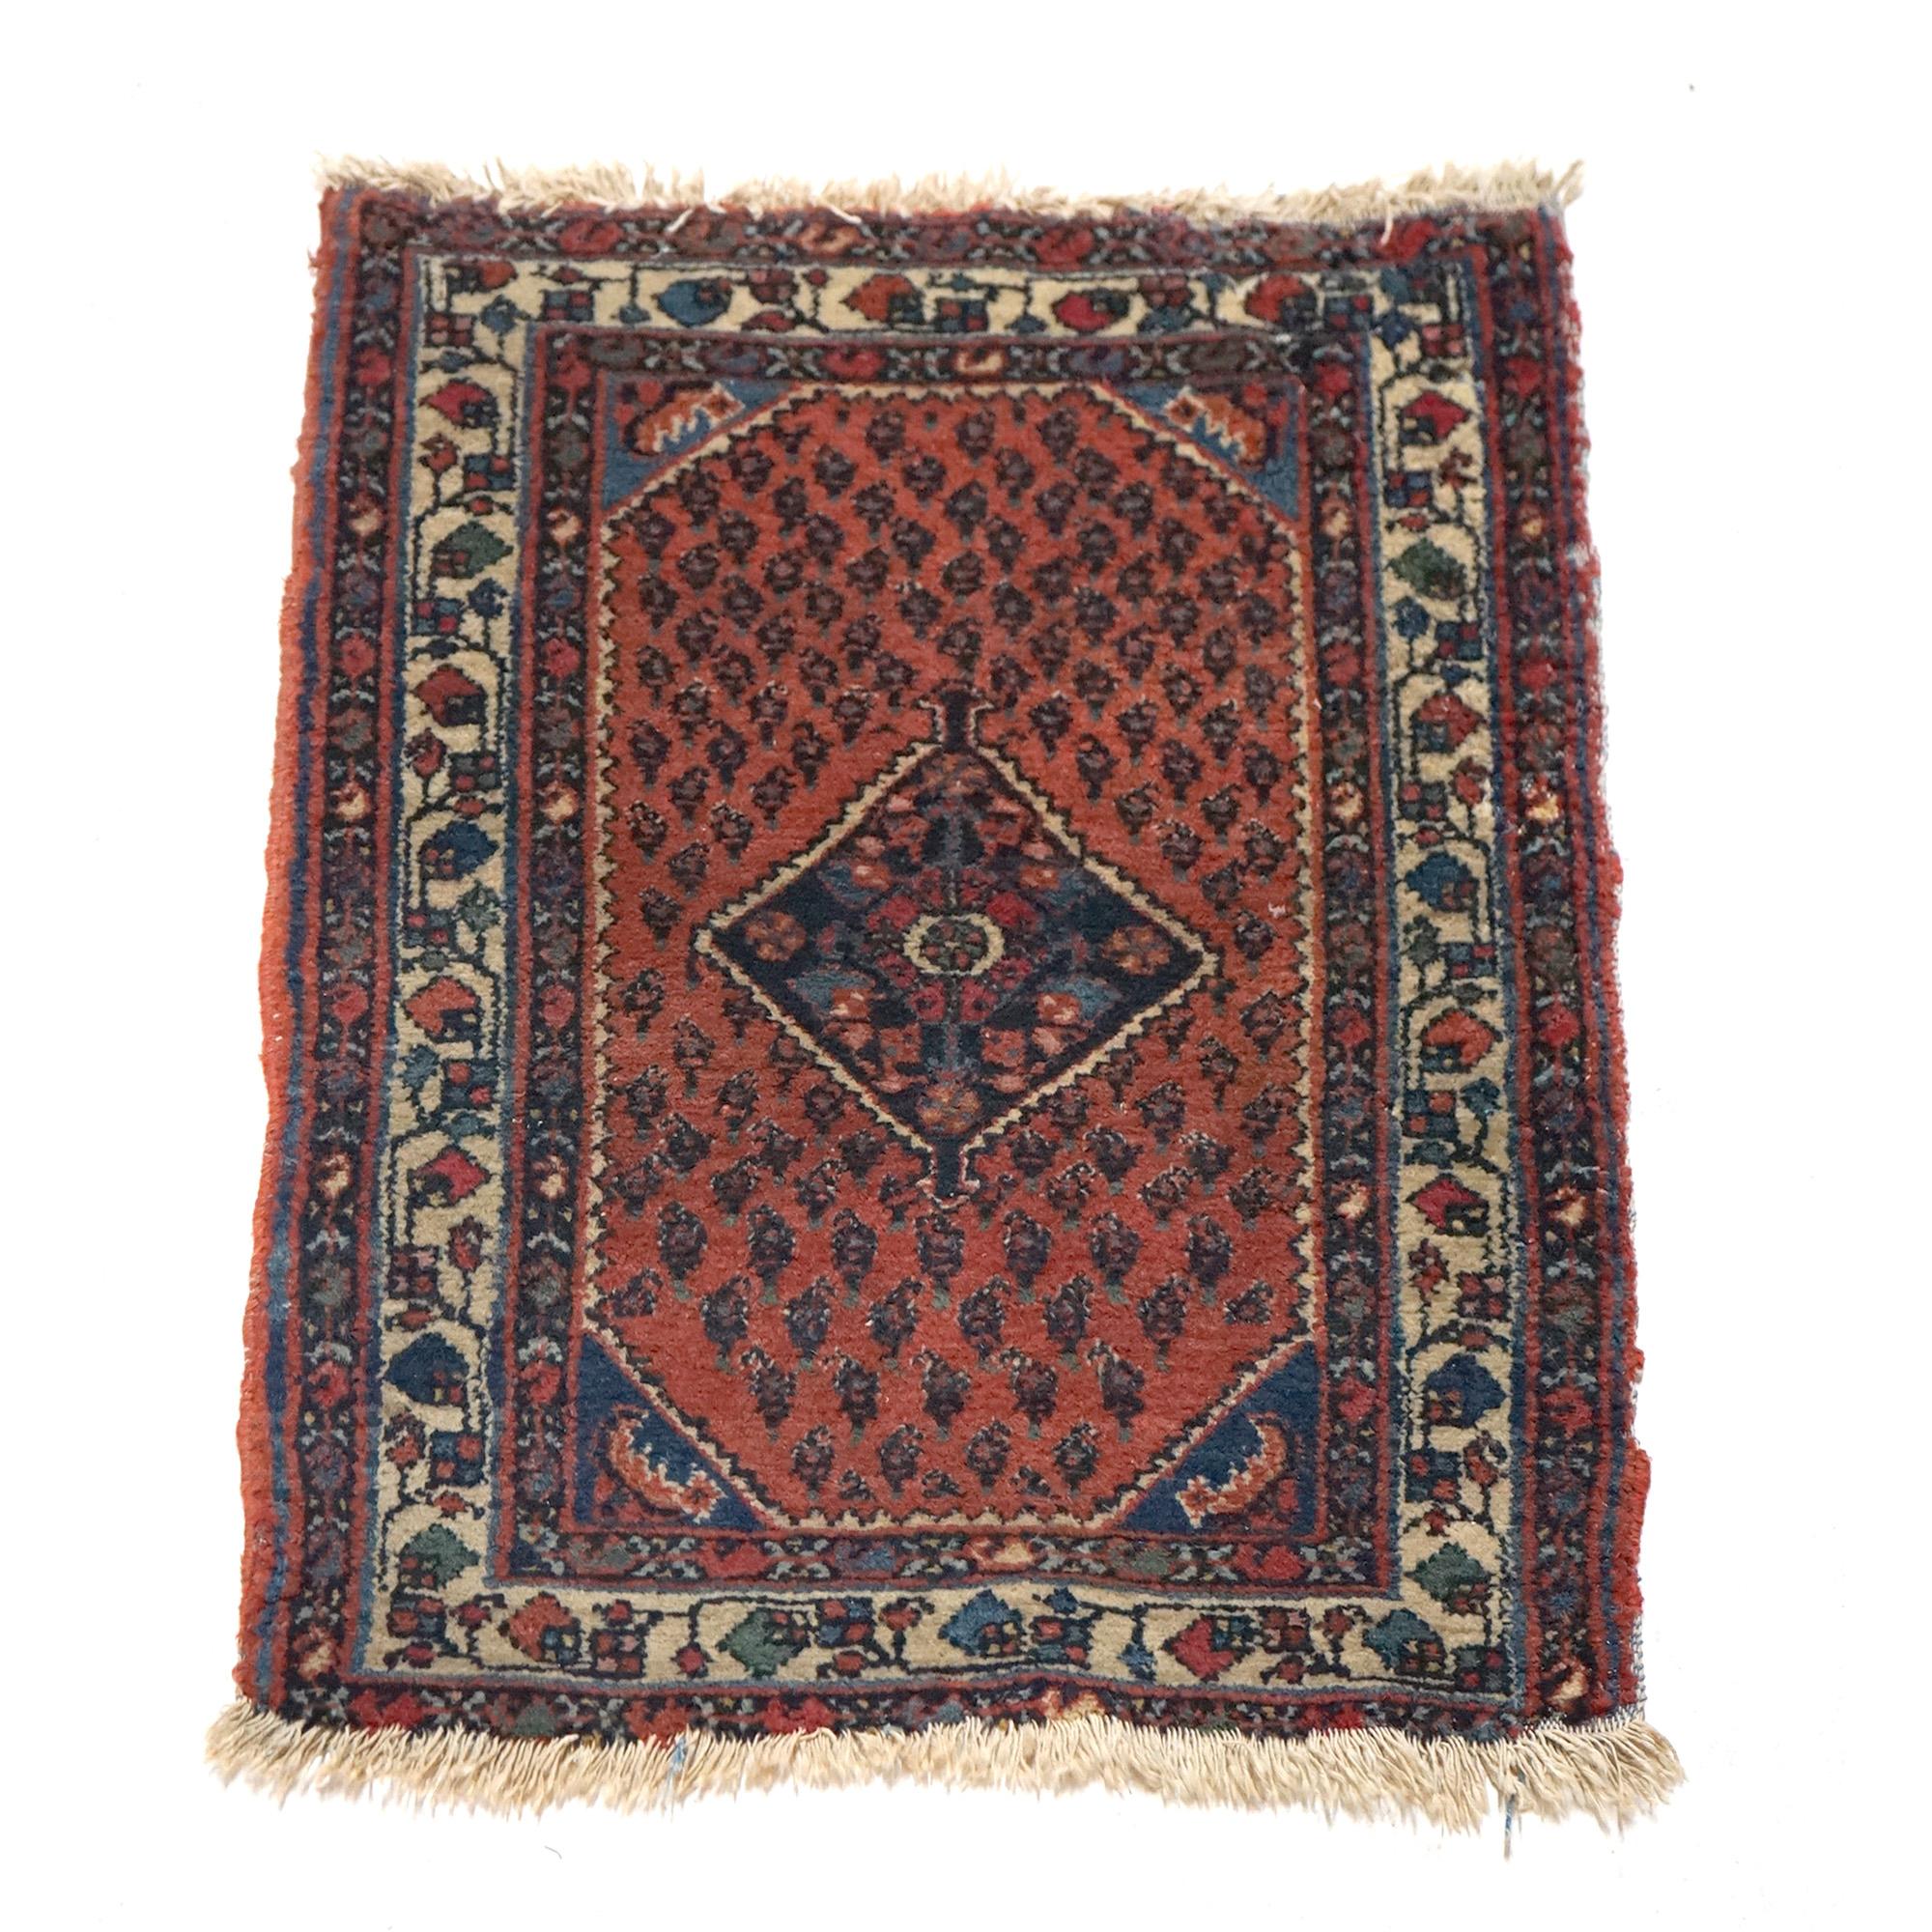 An antique Turkish oriental rug mat offers wool construction with central medallion, circa 1920

Measures - 30.5